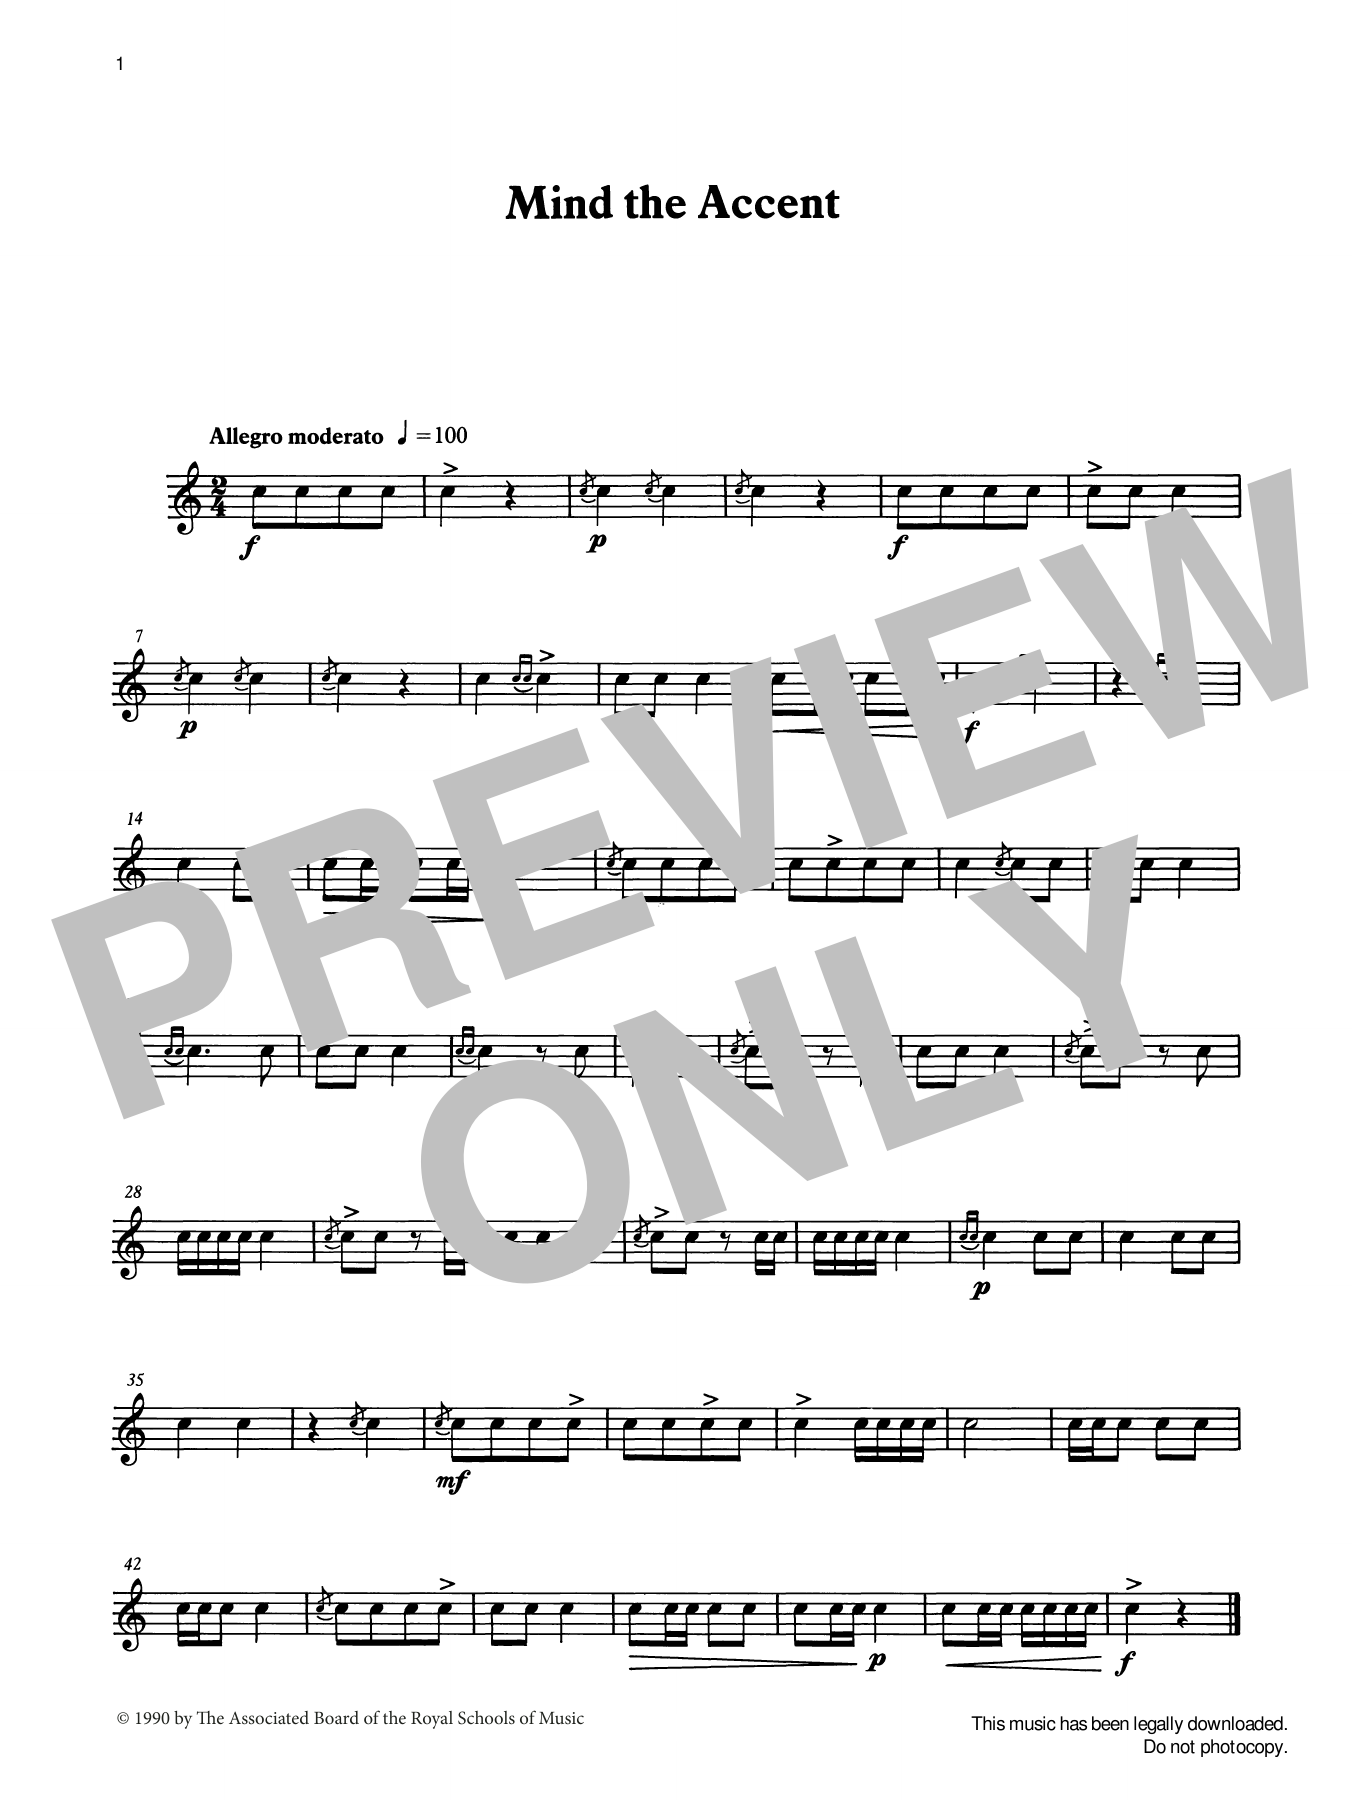 Download Ian Wright and Kevin Hathaway Mind the Accent from Graded Music for S Sheet Music